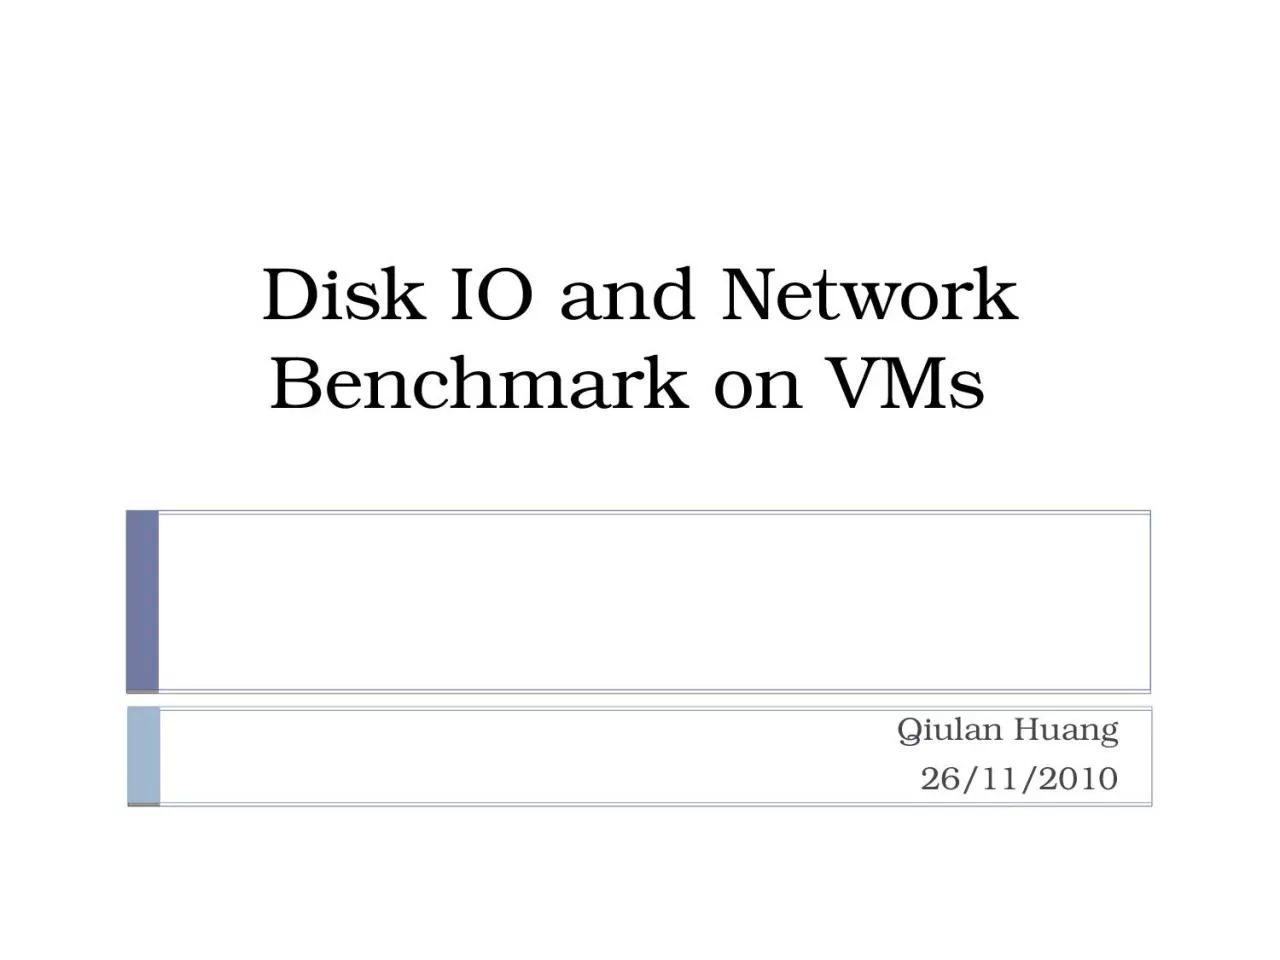 Disk IO and Network Benchmark on VMs